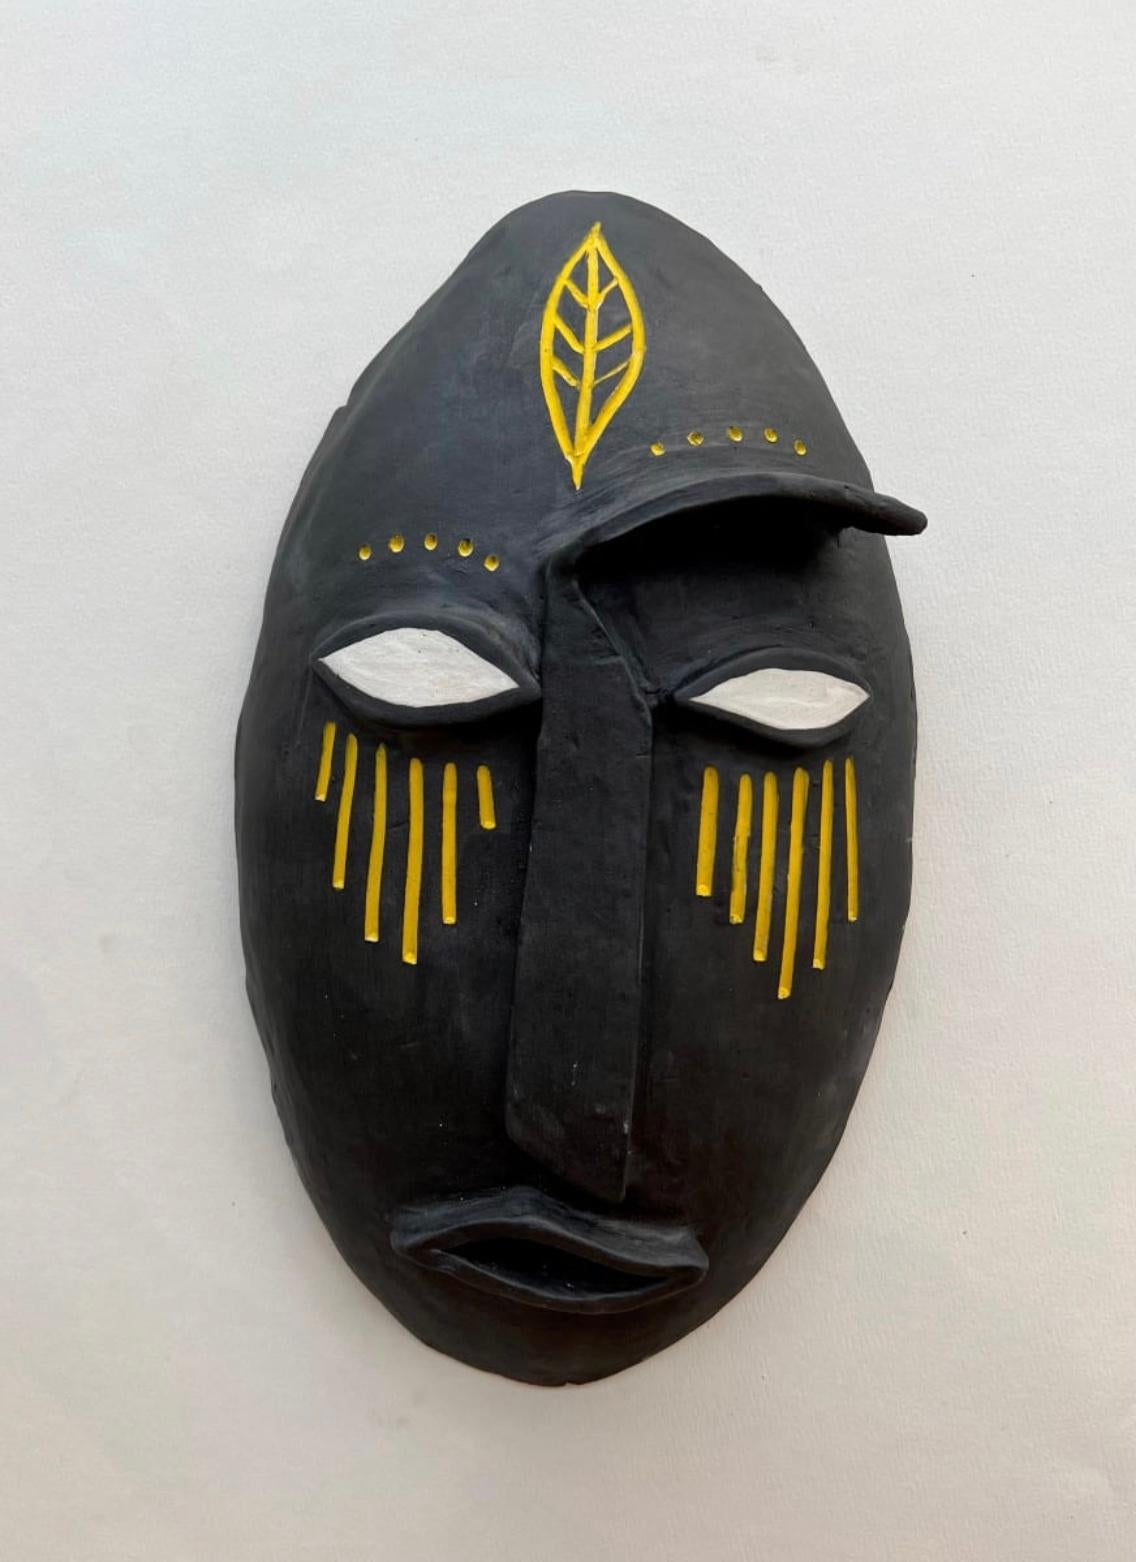 Clay abstract sculpture of a black mask with yellow lines on it. 

Unique one of a kind painting signed by the artist. 

ARTIST BIO 
Alice Mizrachi is a New York based interdisciplinary artist and educator working in the mediums of painting, murals